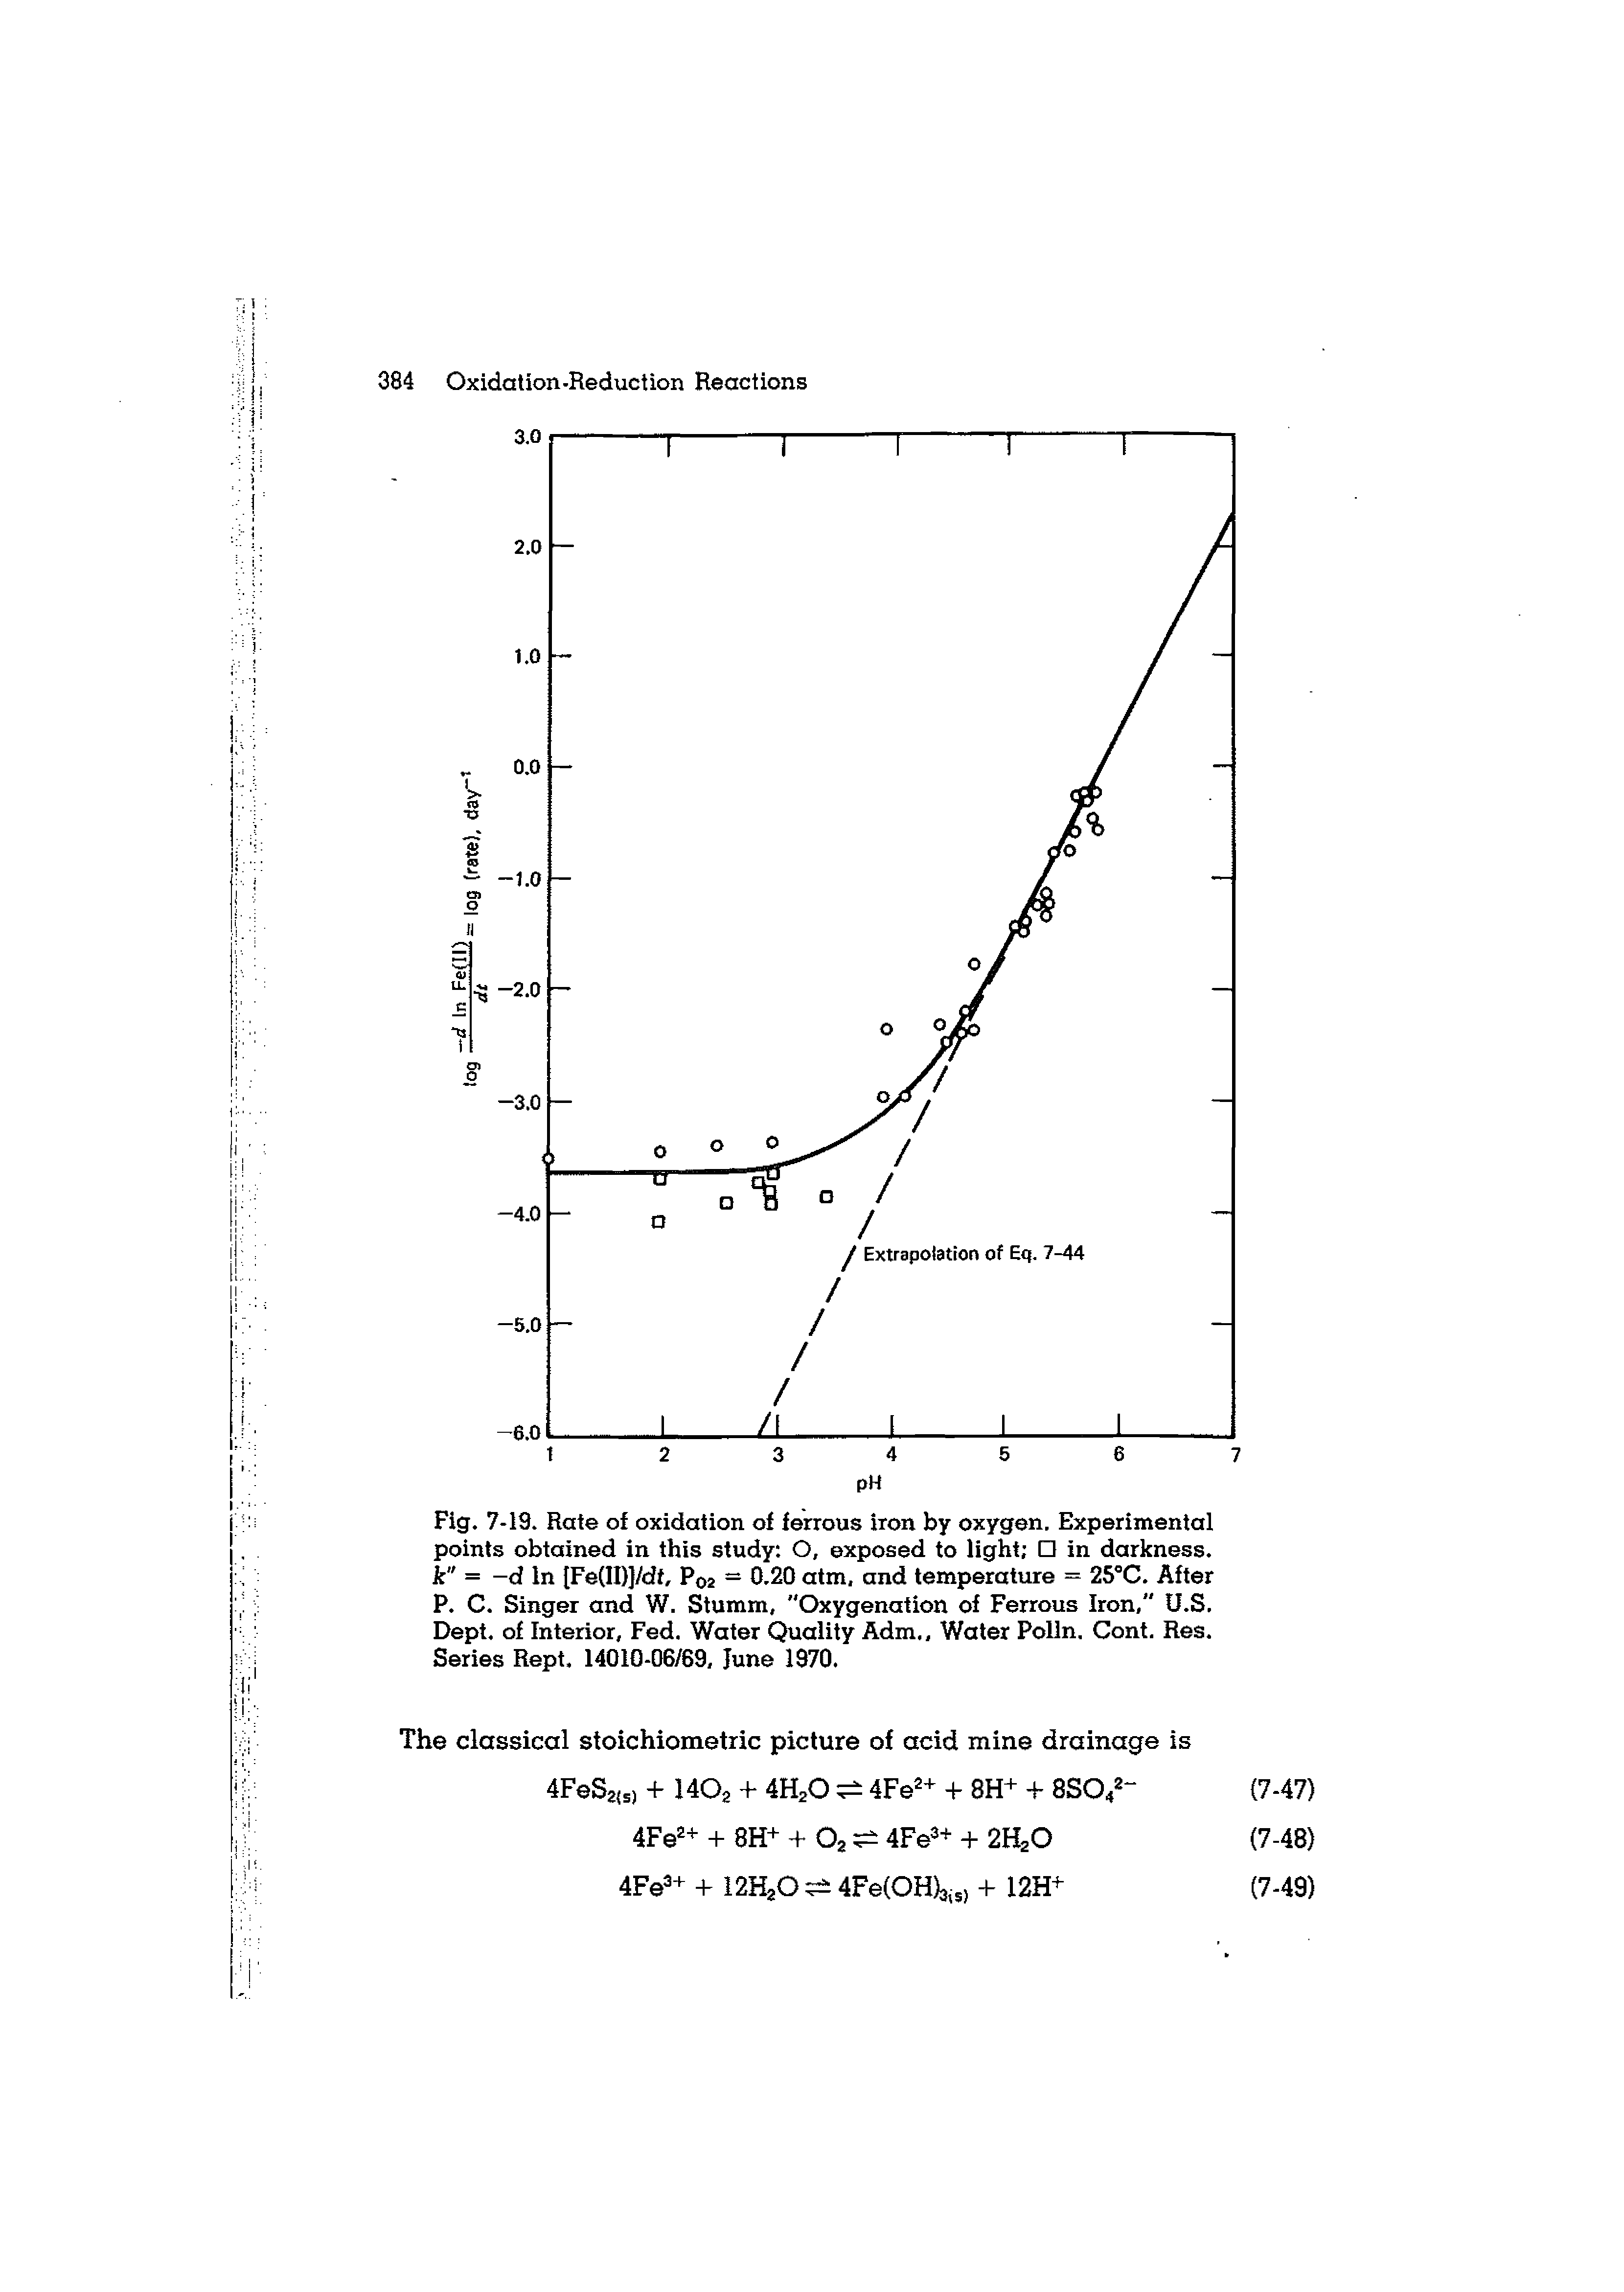 Fig. 7-19. Rate of oxidation of ferrous iron by oxygen. Experimental points obtained in this study O, exposed to light in darkness. k" = -d In [FeCII)]/dt, P02 = 0.20 atm, and temperature = 25°C. After P. C. Singer and W. Stumm, "Oxygenation of Ferrous Iron," U.S, Dept, of Interior, Fed. Water Quality Adm., Water Polln. Cont. Res. Series Rept, 14010-06/69, June 1970.